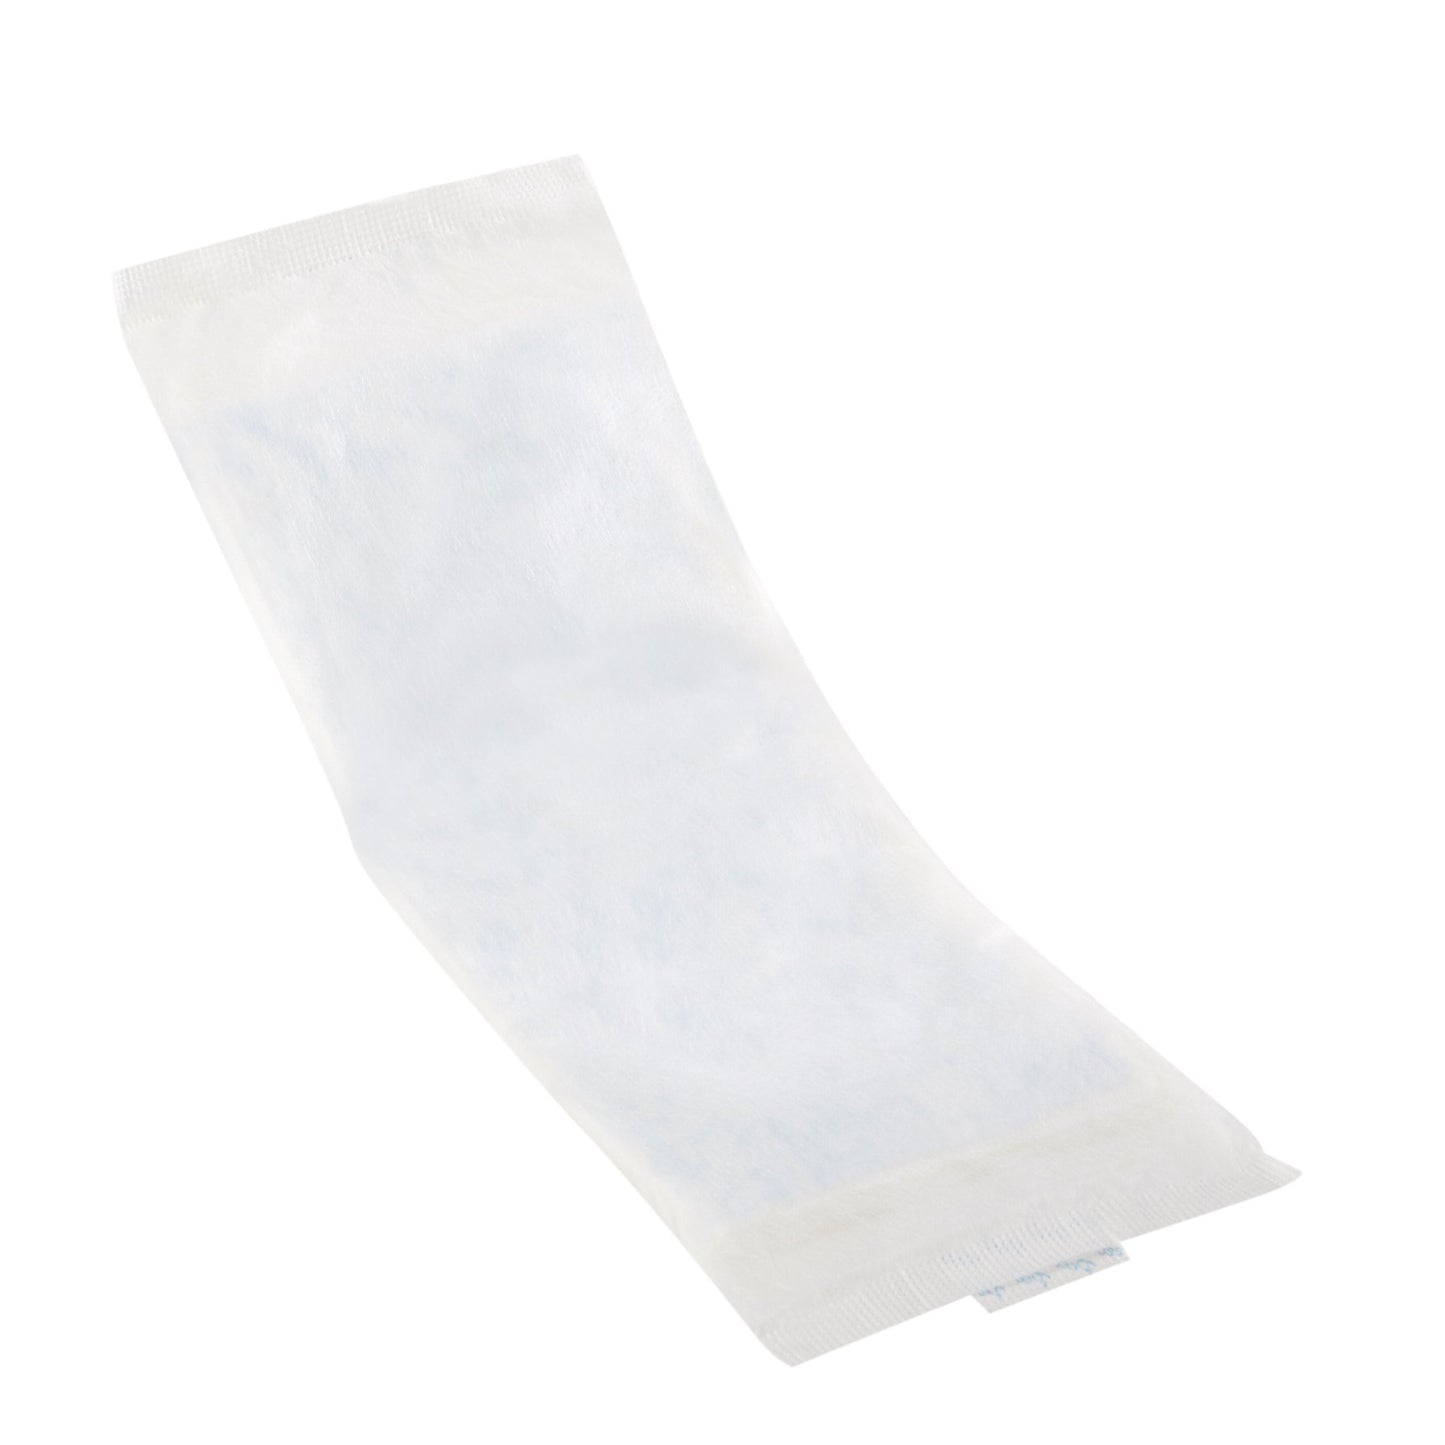 Dignity® Extra™ For Moderate Incontinence Liner, 12-Inch Length, 25 ct